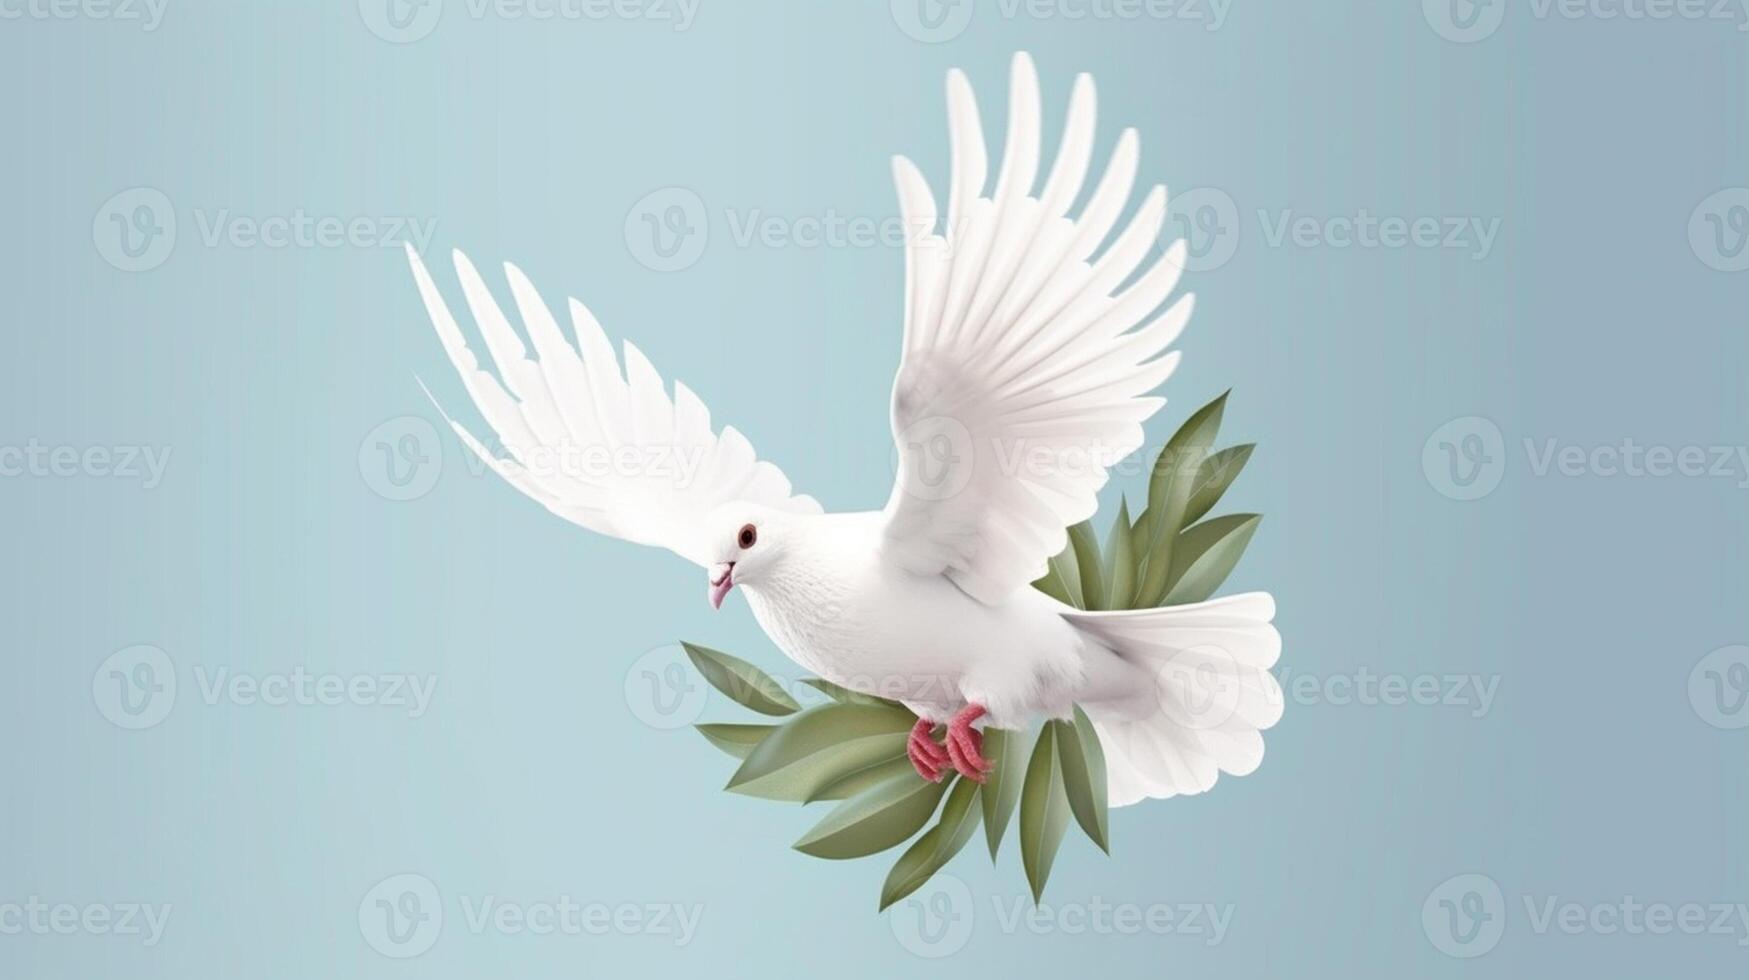 White dove with olive branch on blue background. International Peace Day Concept, photo